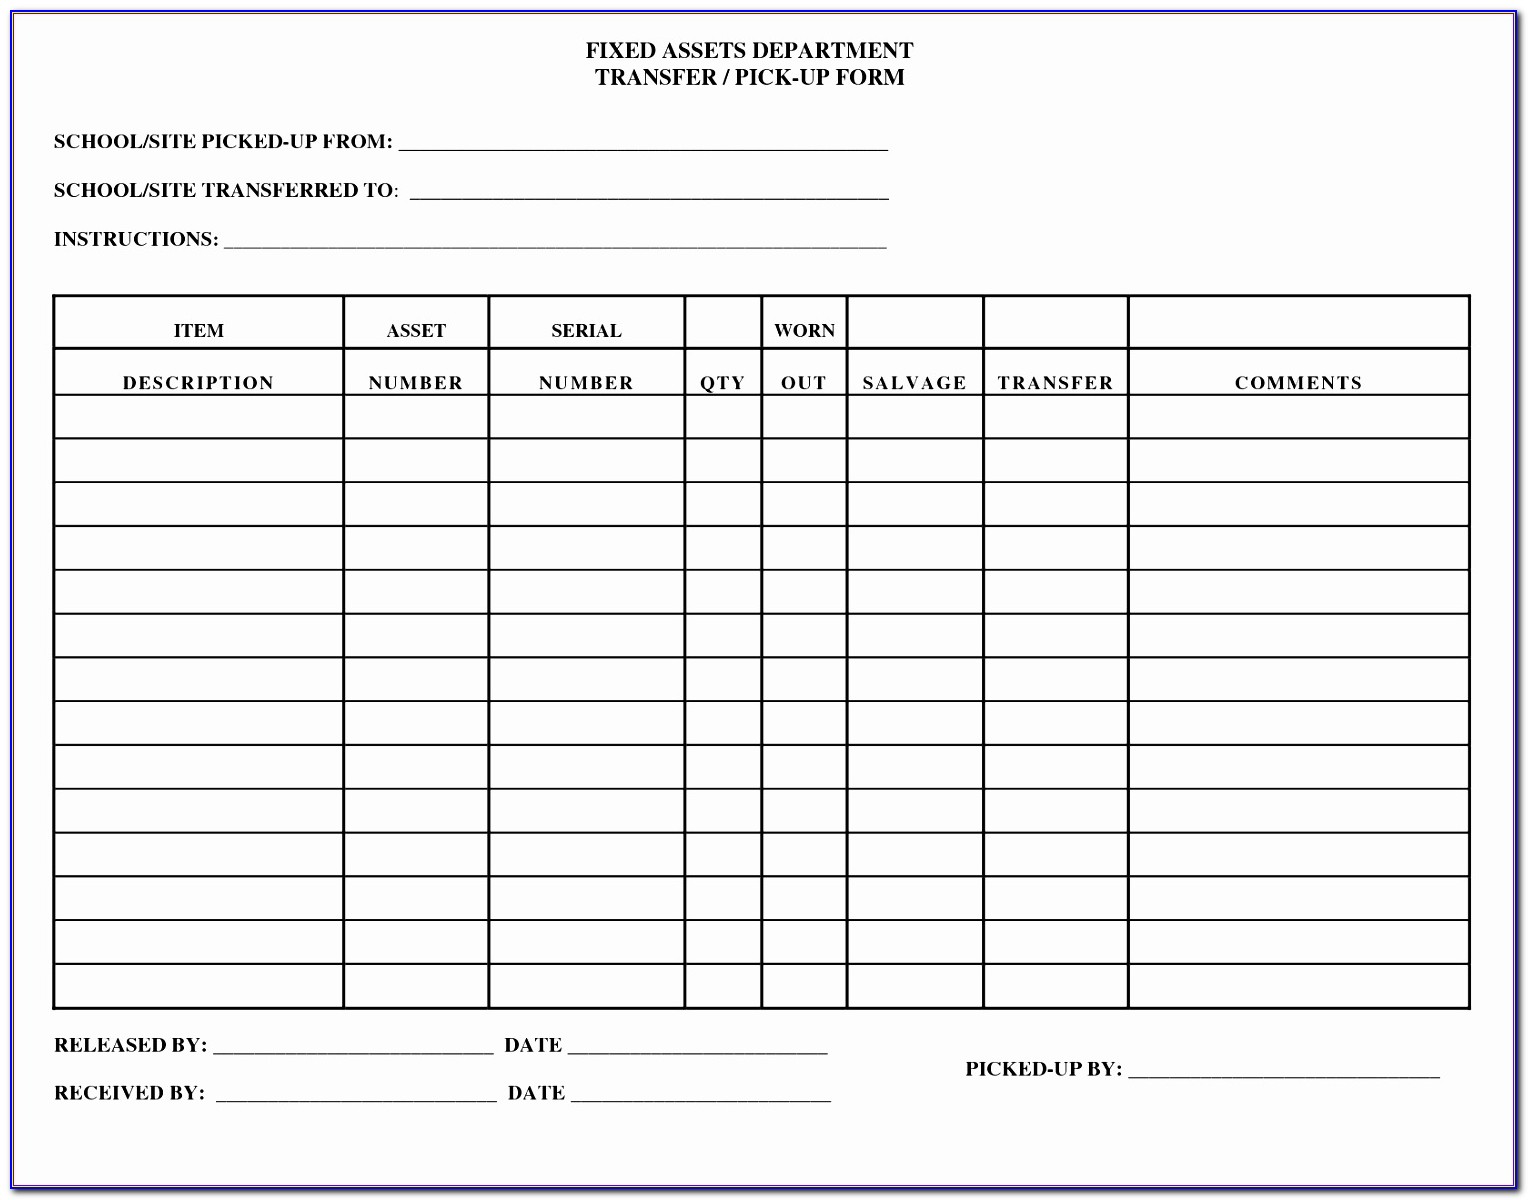 fixed-asset-register-excel-template-download